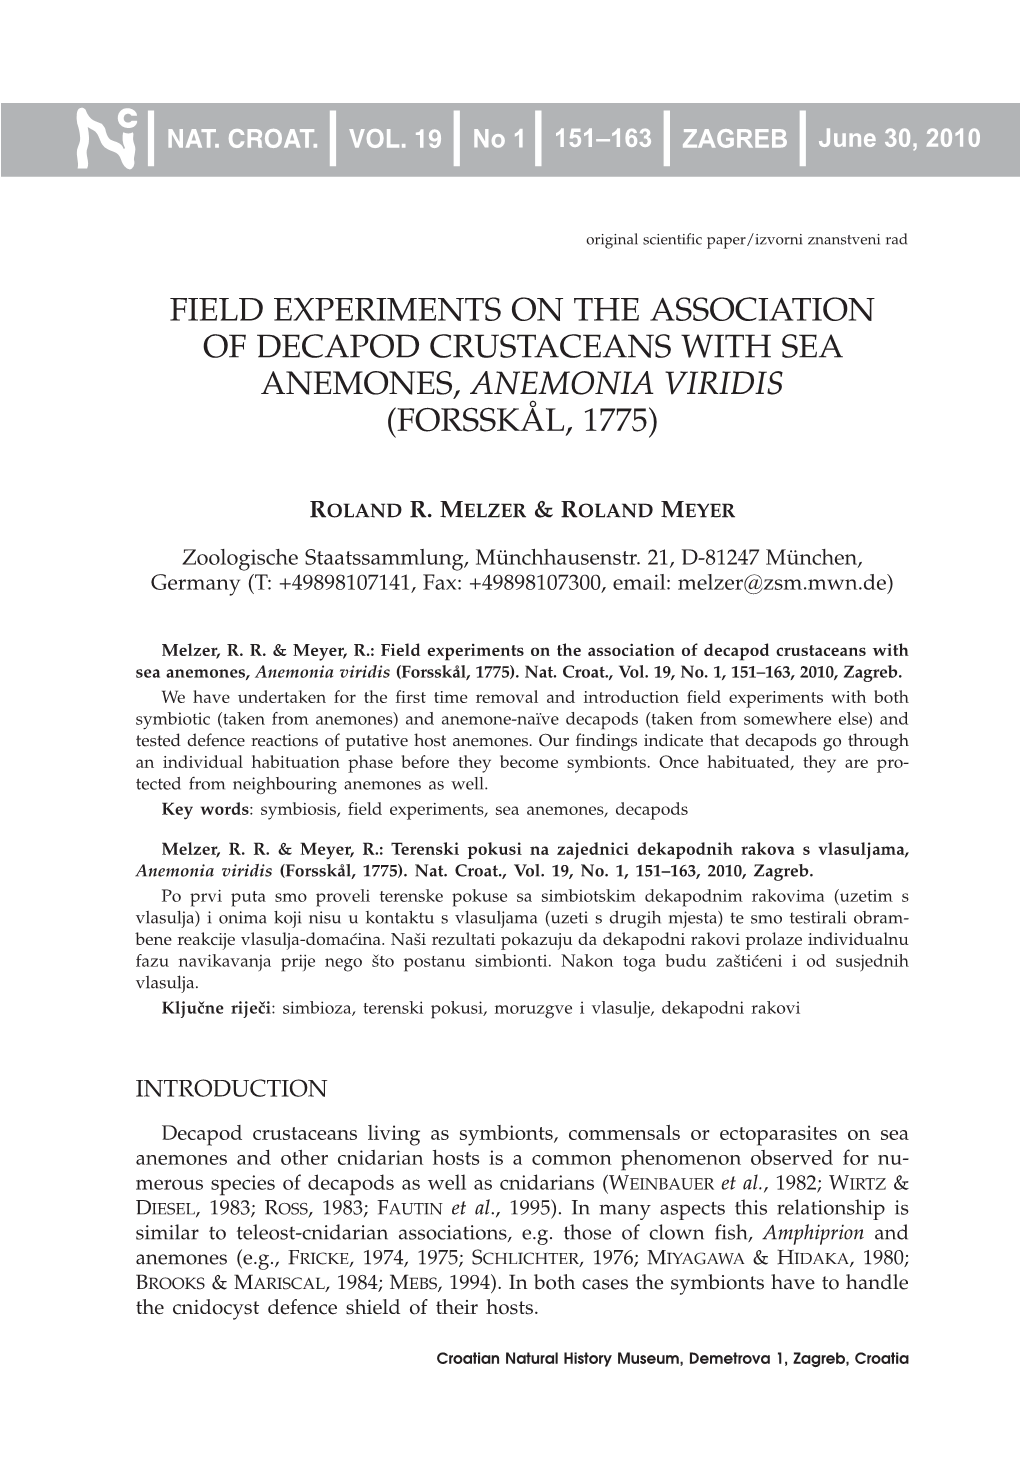 Field Experiments on the Association of Decapod Crustaceans with Sea Anemones, Anemonia Viridis (Forsskål, 1775)